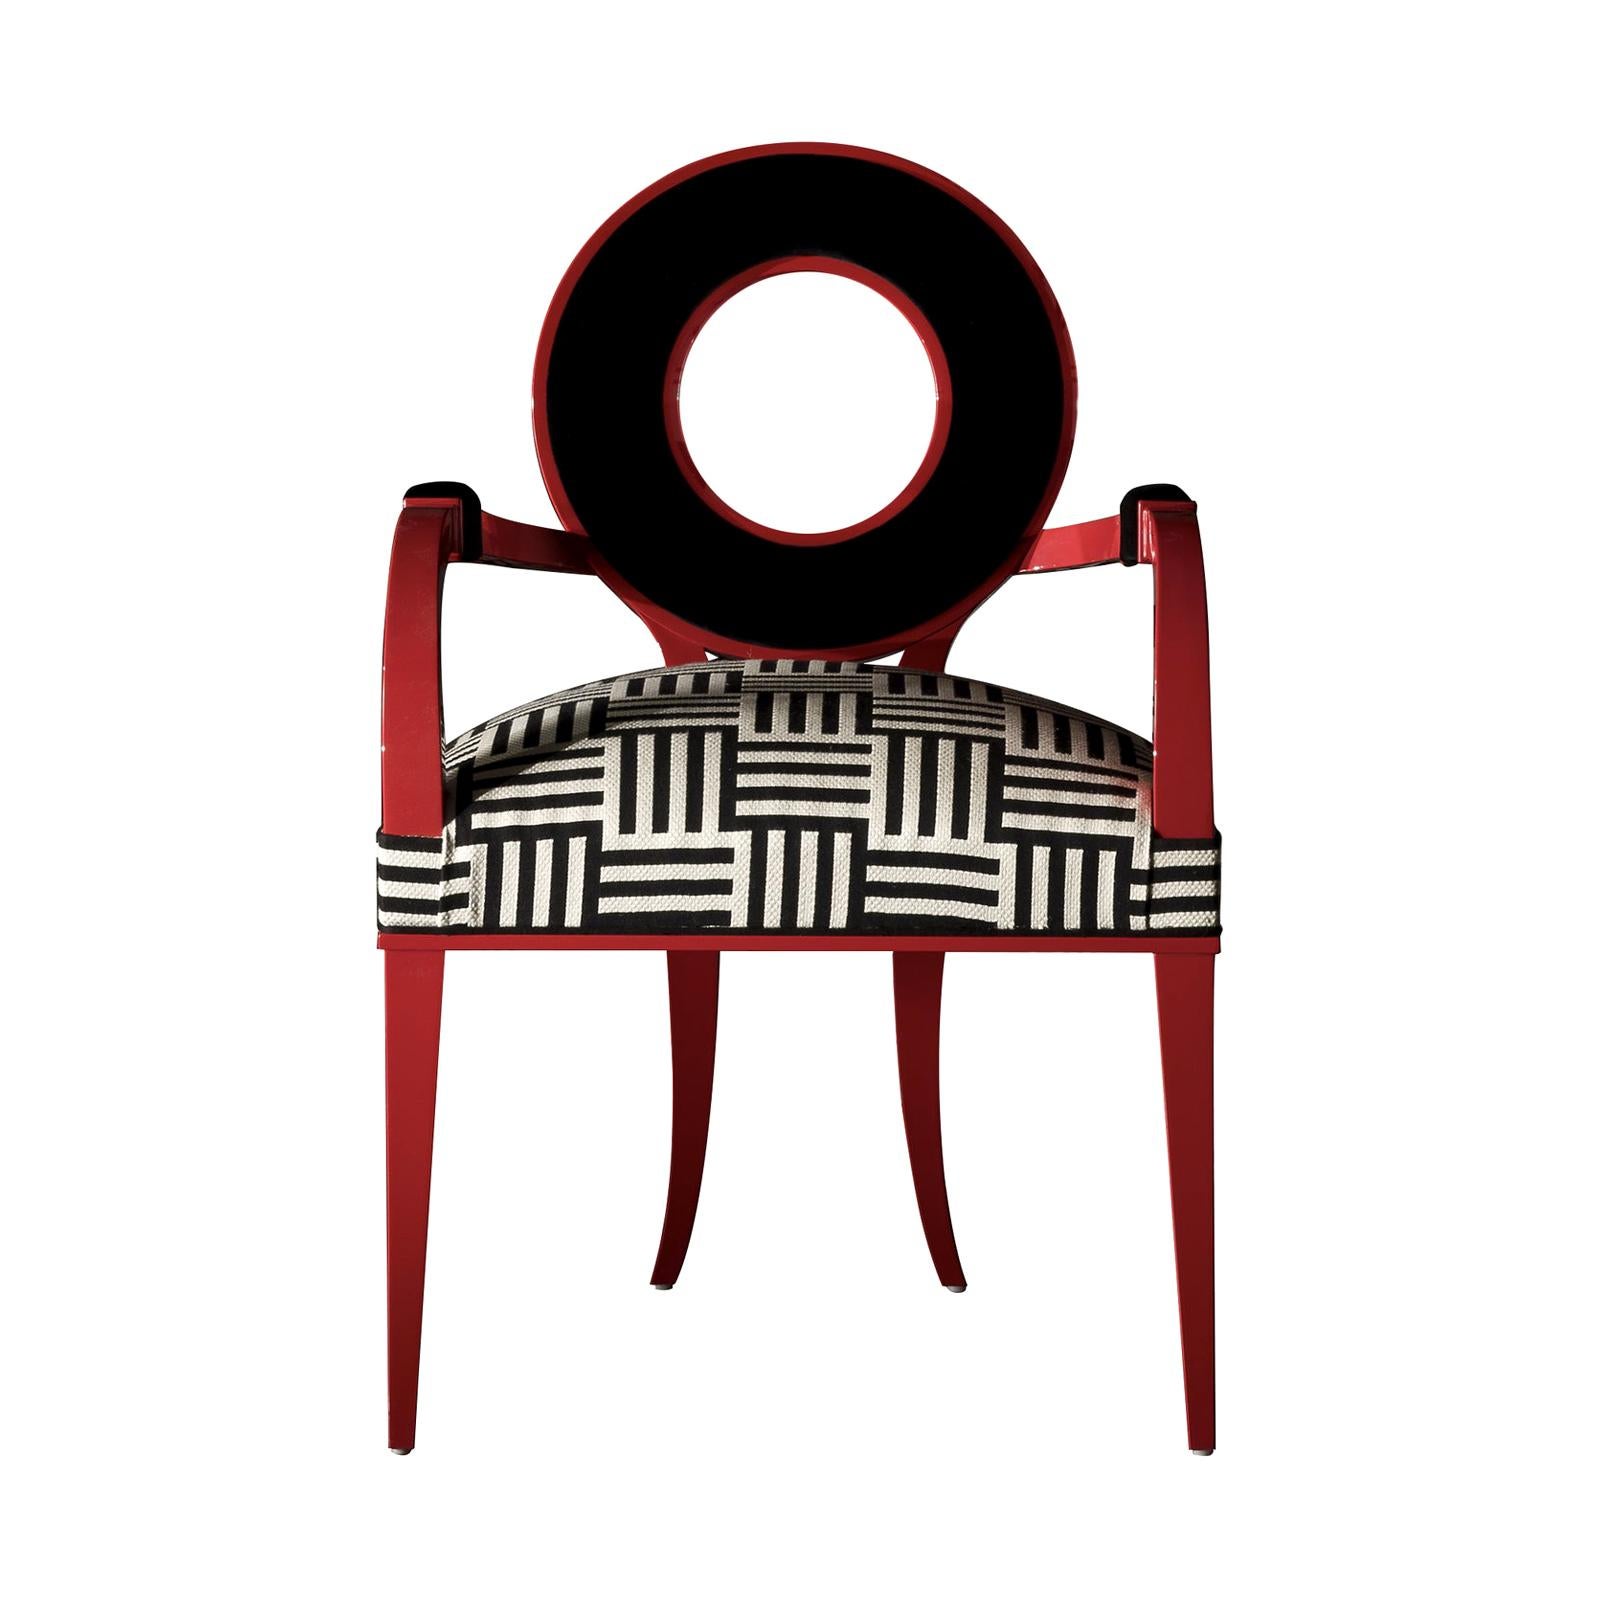 New Moon Red Chair